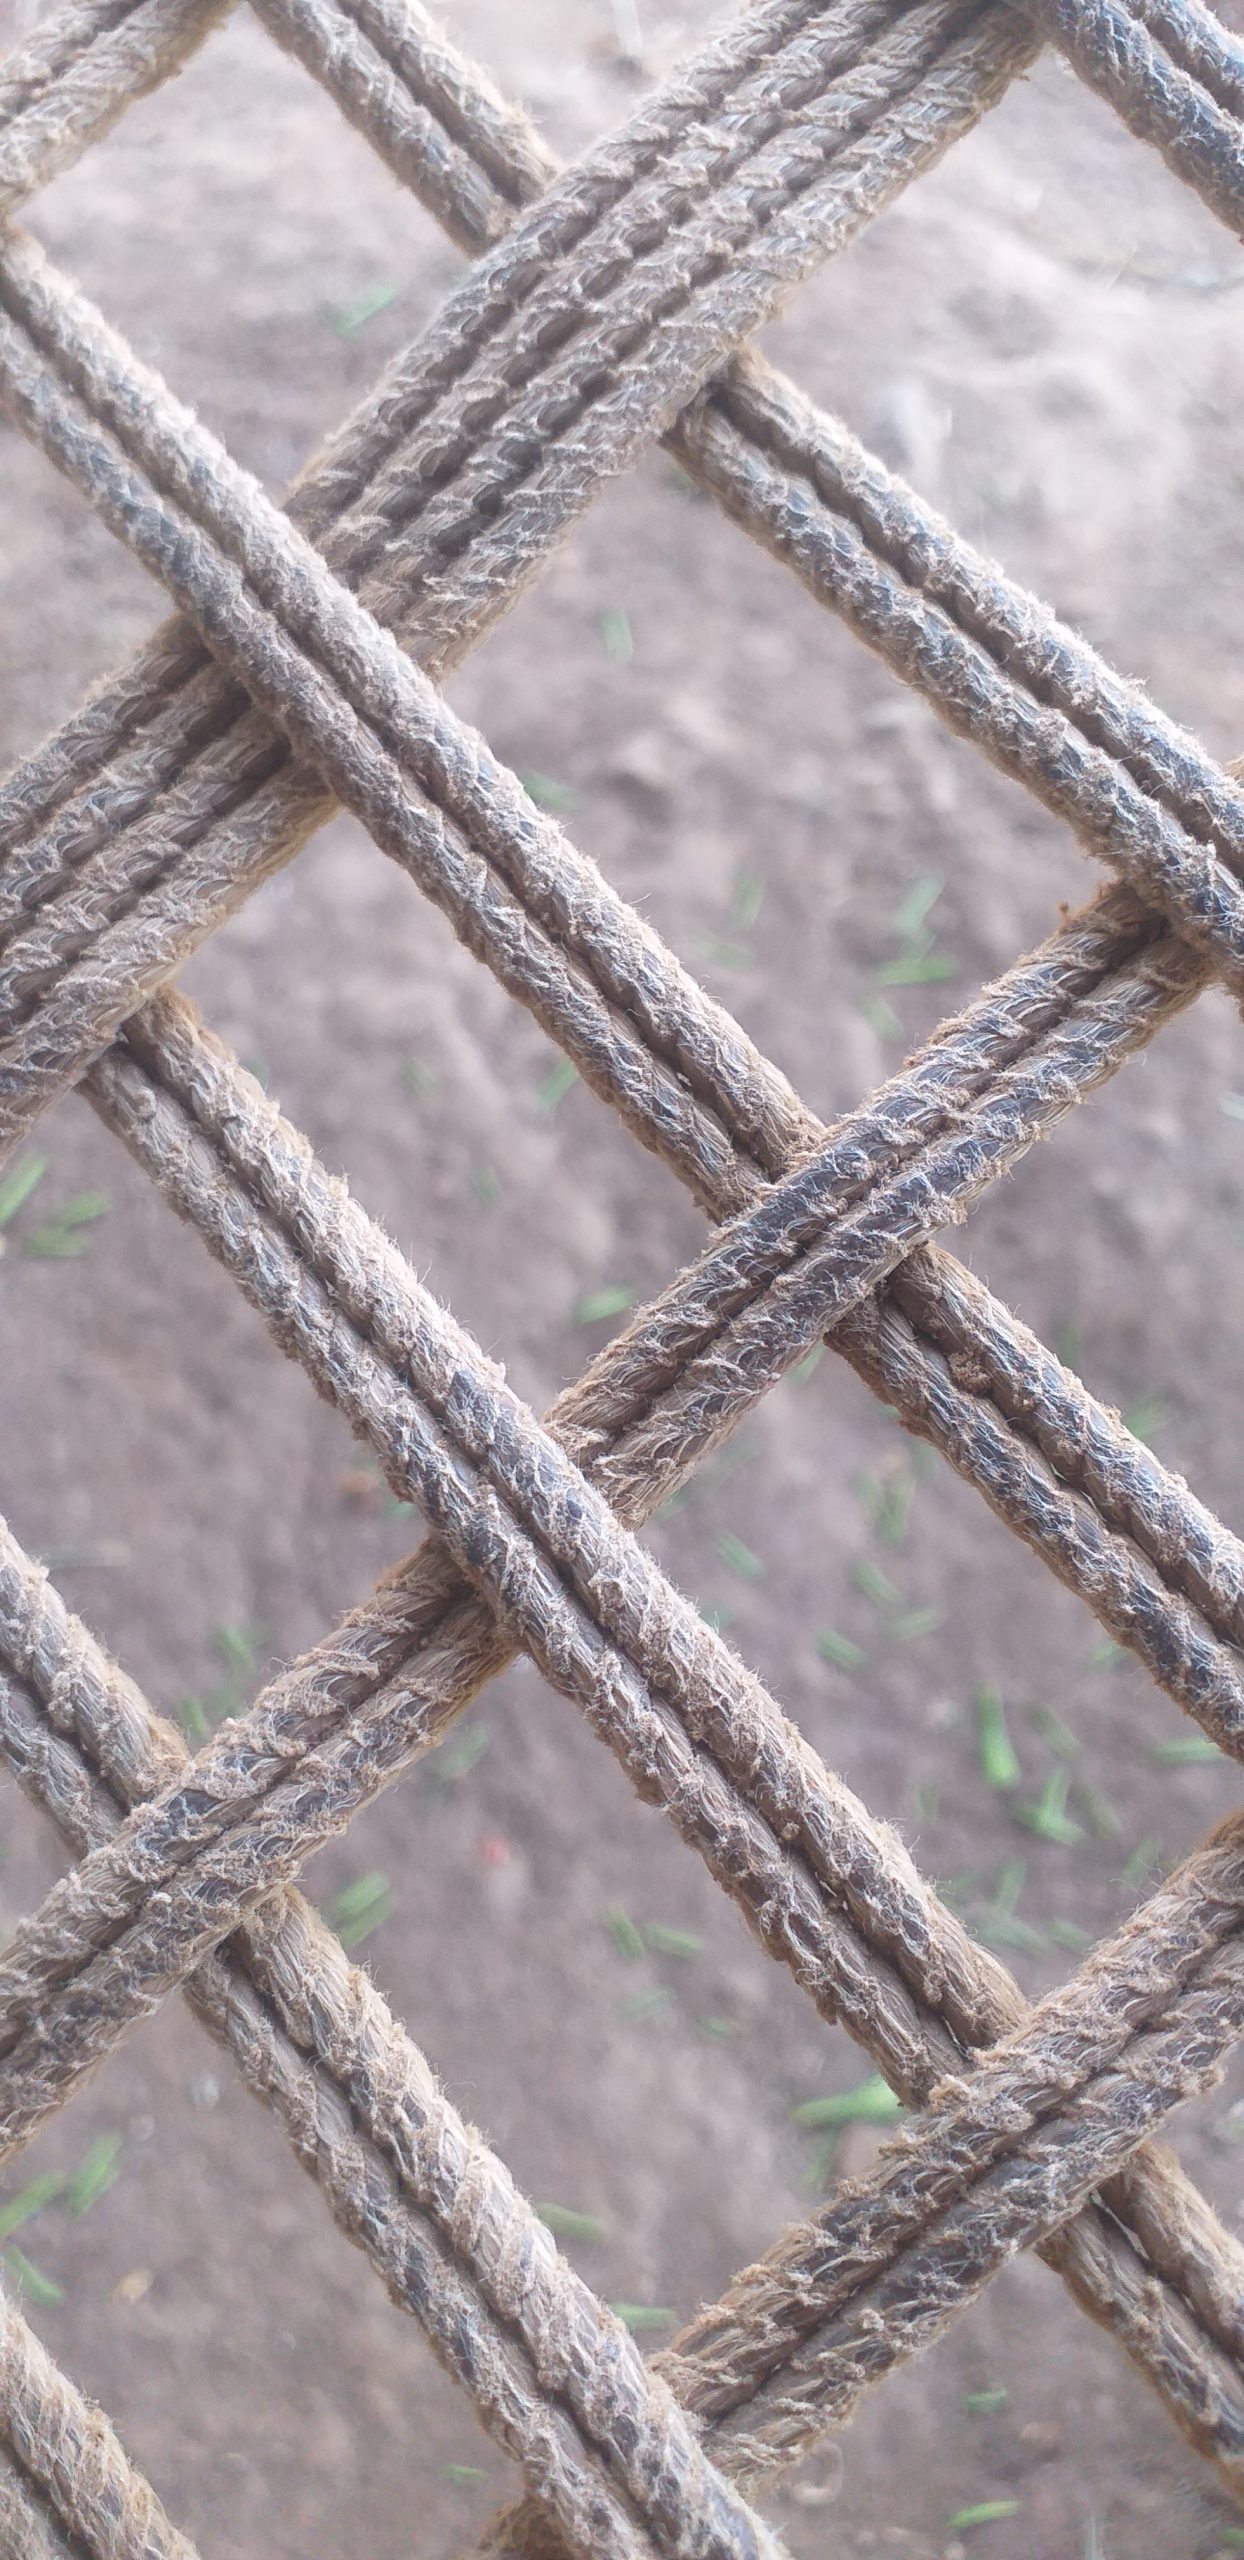 Woven ropes